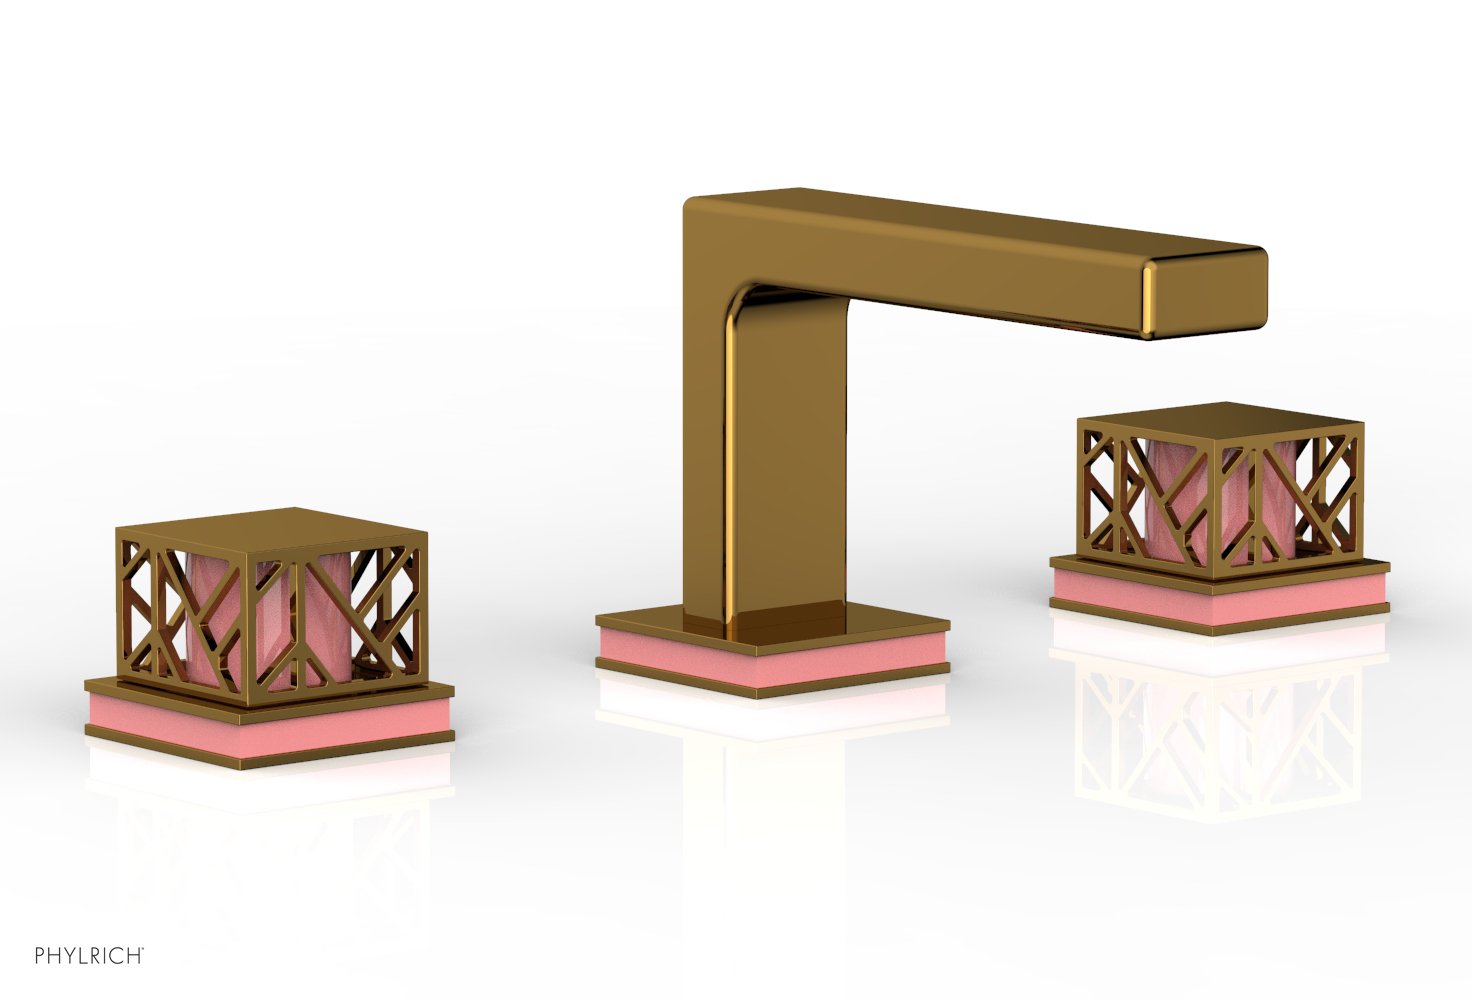 Phylrich JOLIE Widespread Faucet - Square Handles with "Pink" Accents